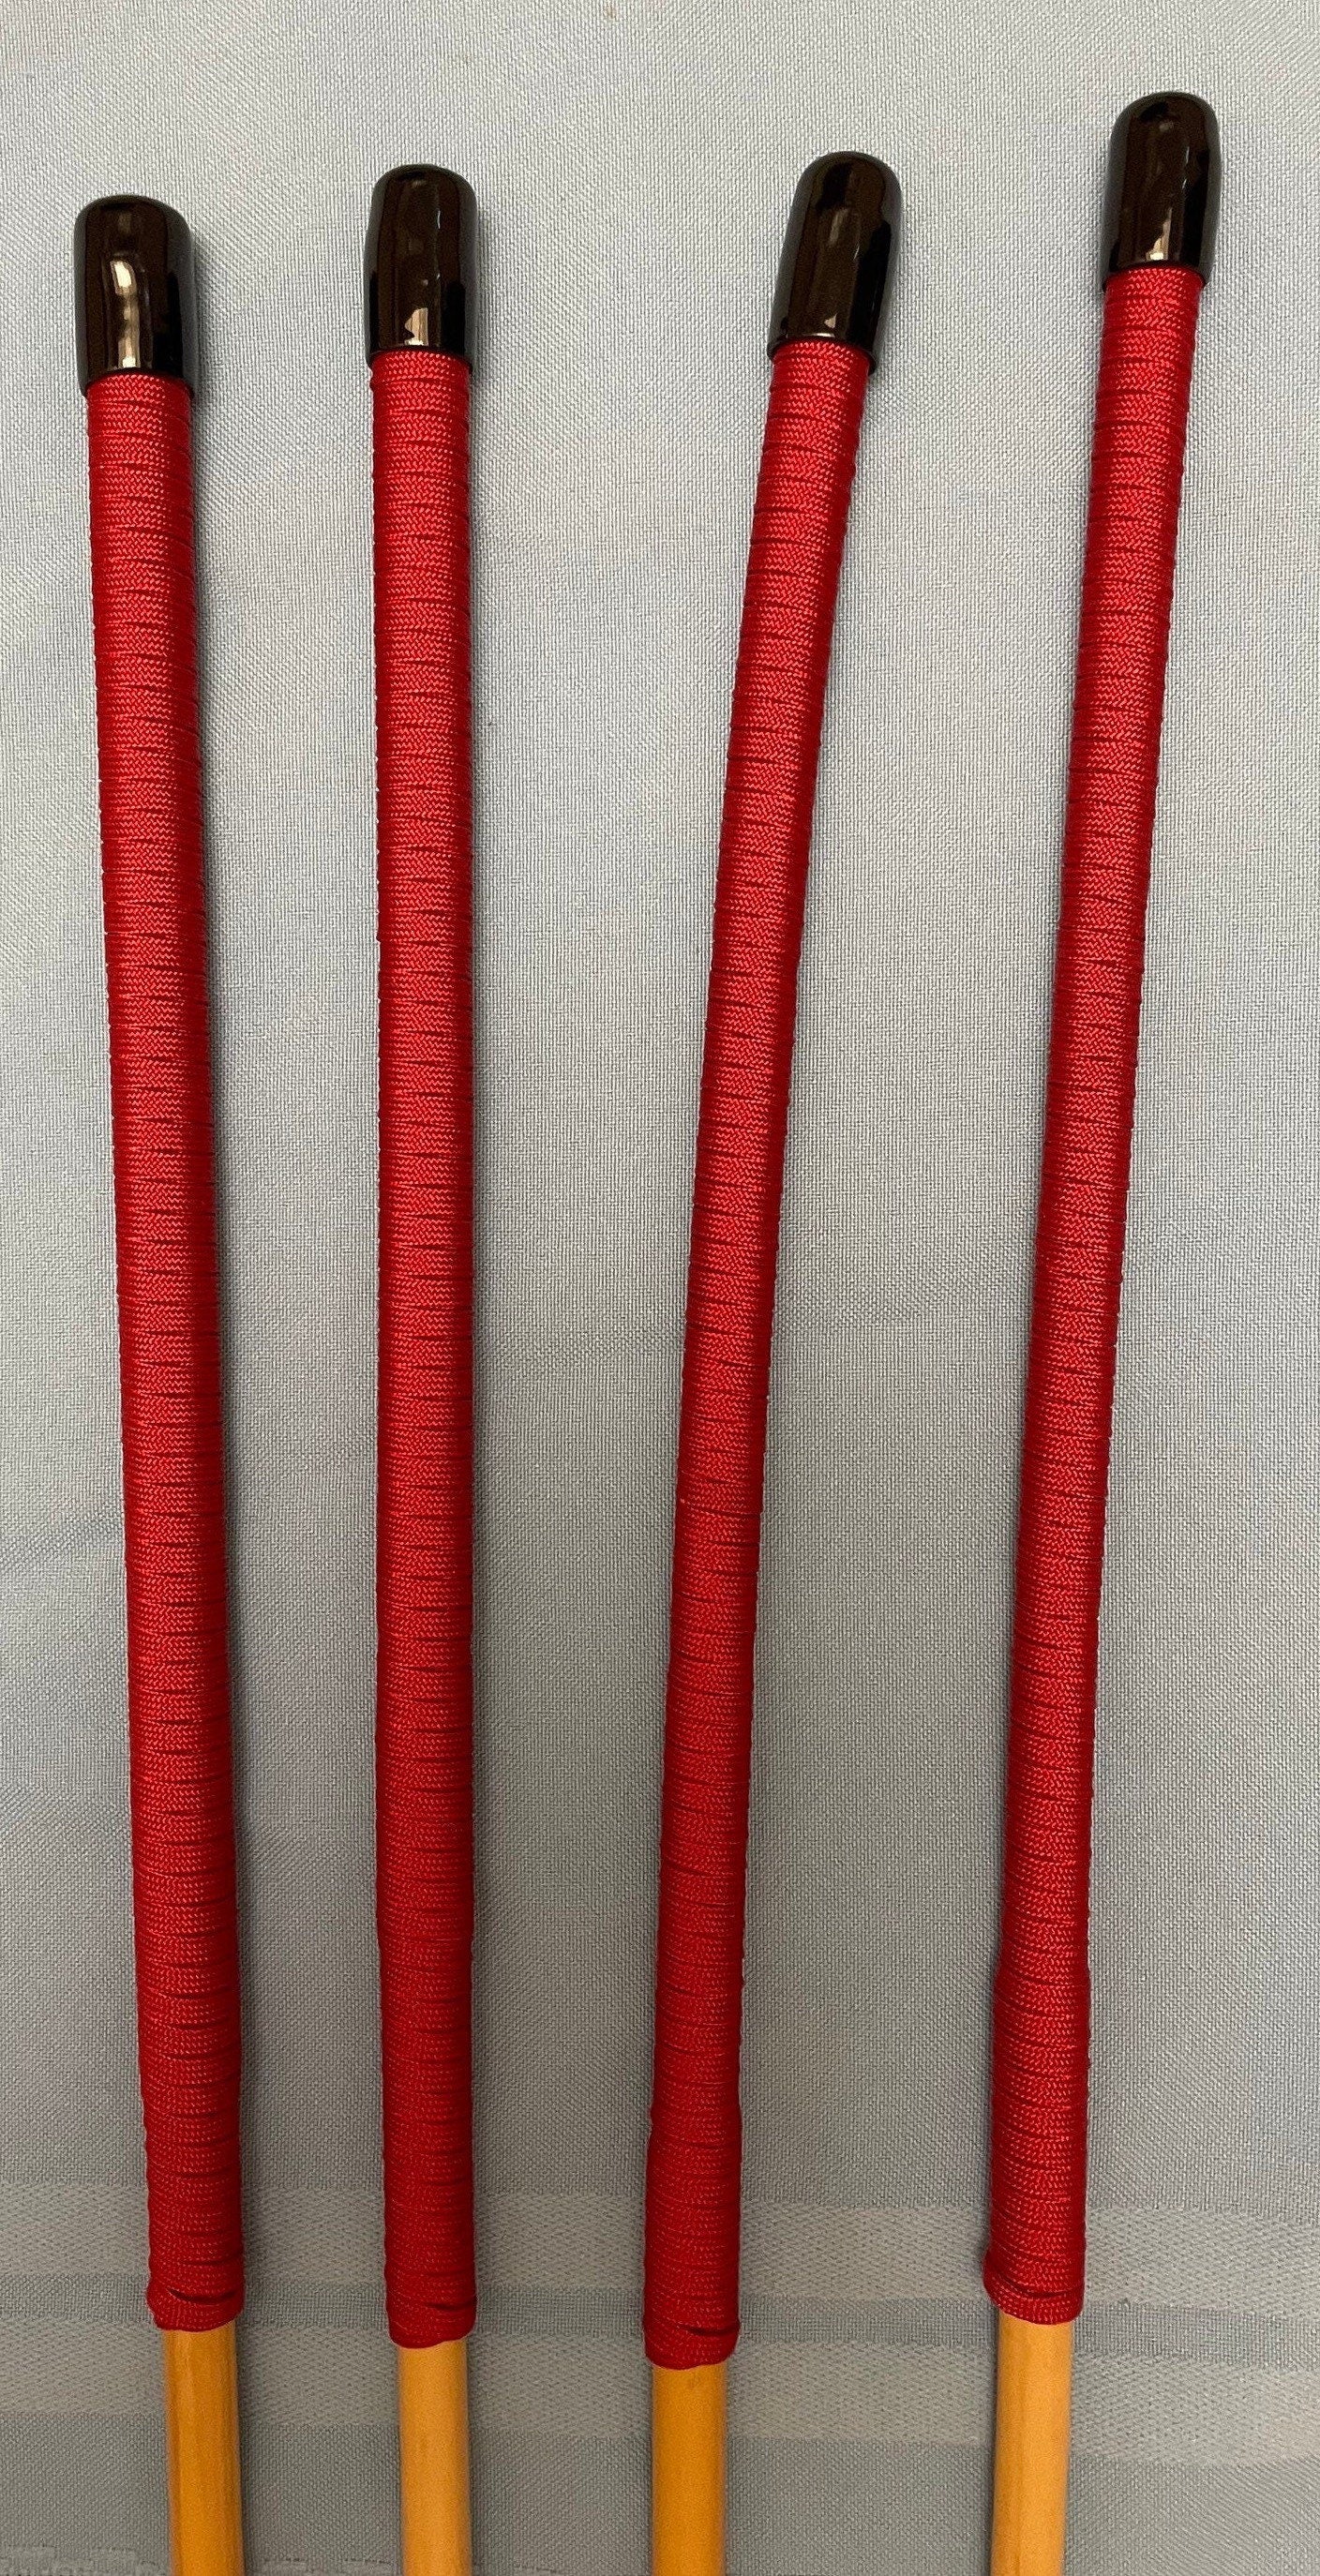 Knotless Dragon Canes / No Knot Dragon Canes / School Canes Set of 4  - 82 - 84 cms L  & 9-9.5/10-10.5/11-11.5/12-12.5 mm D - IMPERIAL RED Paracord Handles